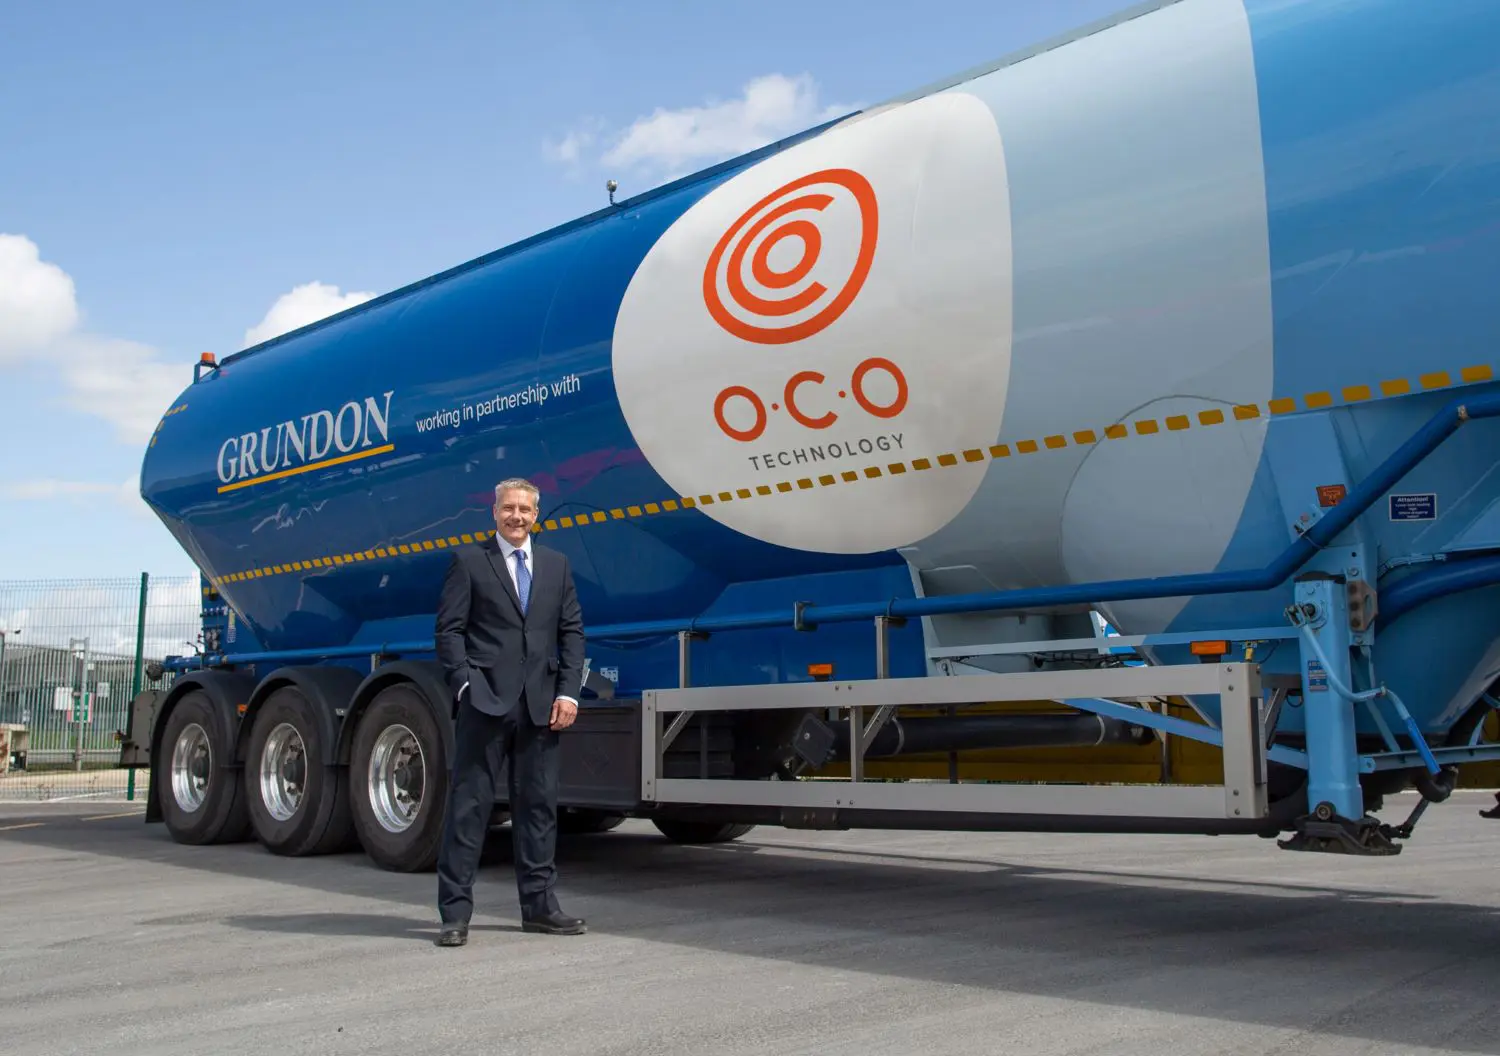 Steve Greig, managing director of O.C.O Technology, with one of the dual branded tankers